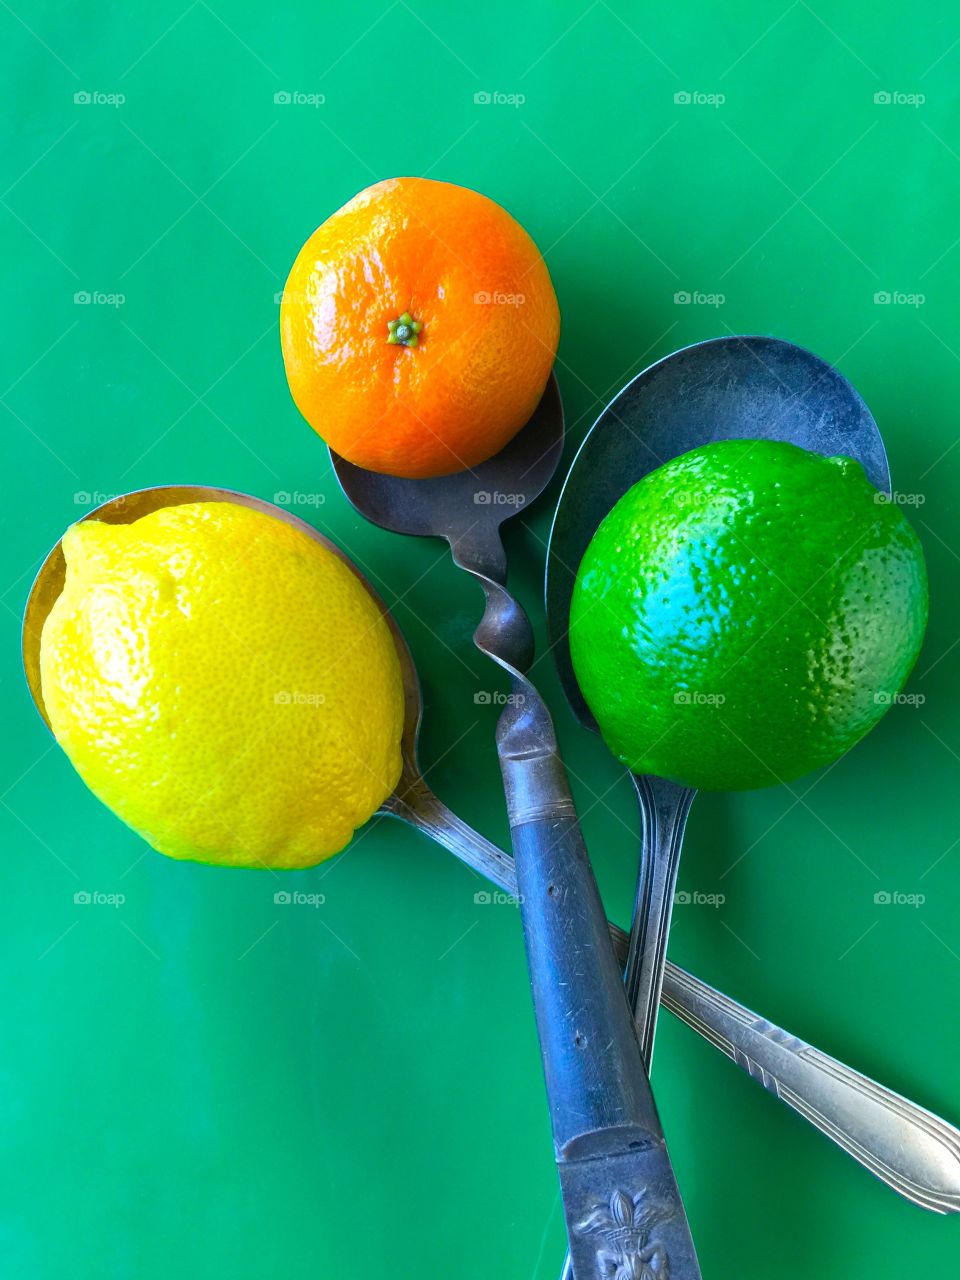 A clementine, lemon and lime on old spoons